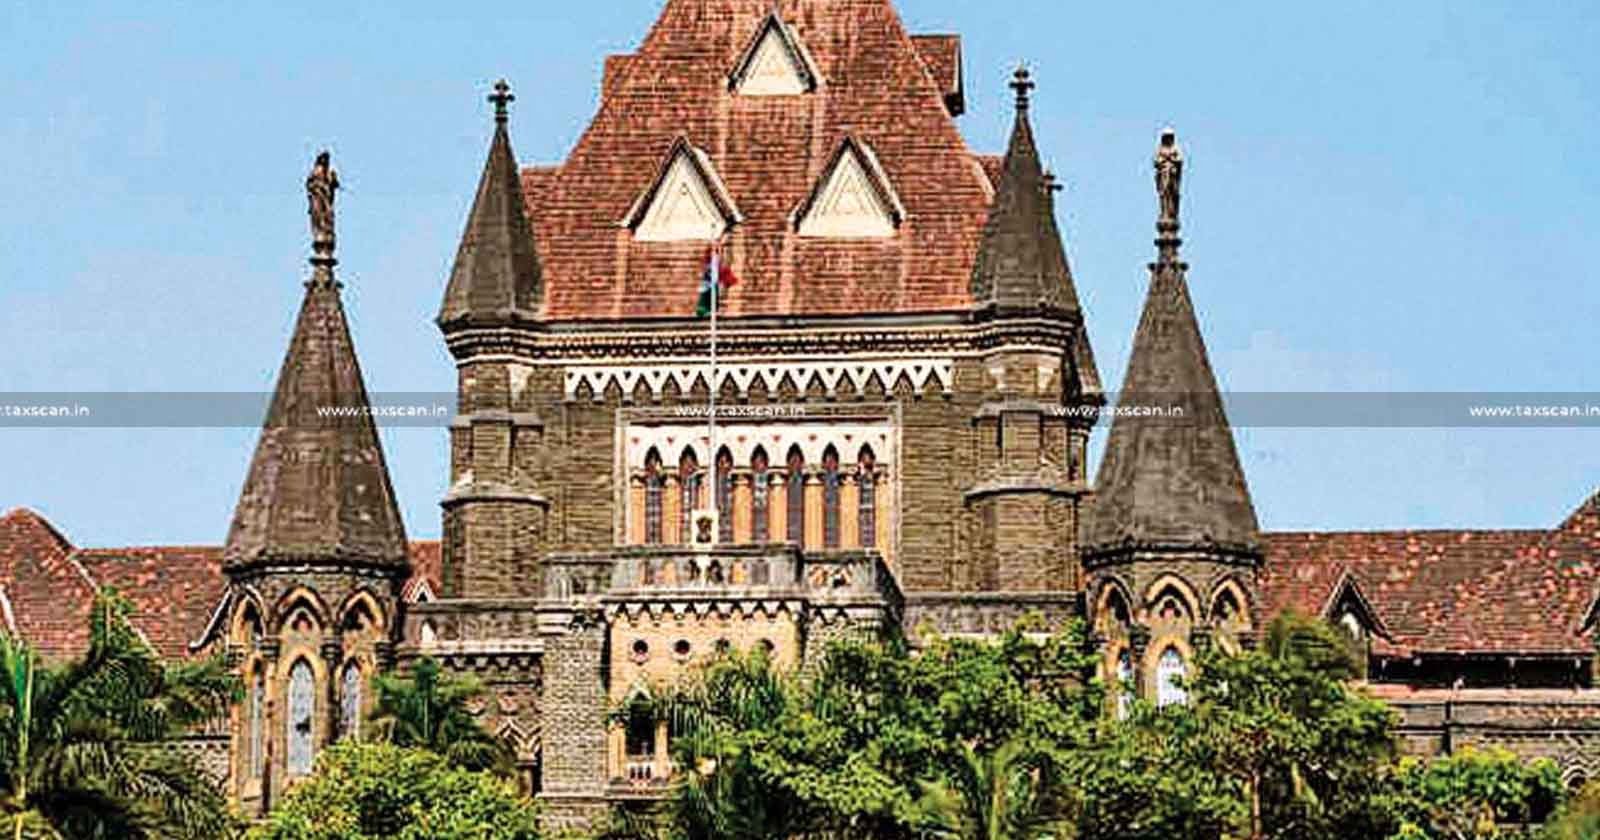 No Omission - Non-disclosure on Part of Assessee - Bombay HC Quashes Re-Assessment - Non-disclosure -Re-Assessment - Bombay High Court - taxscan